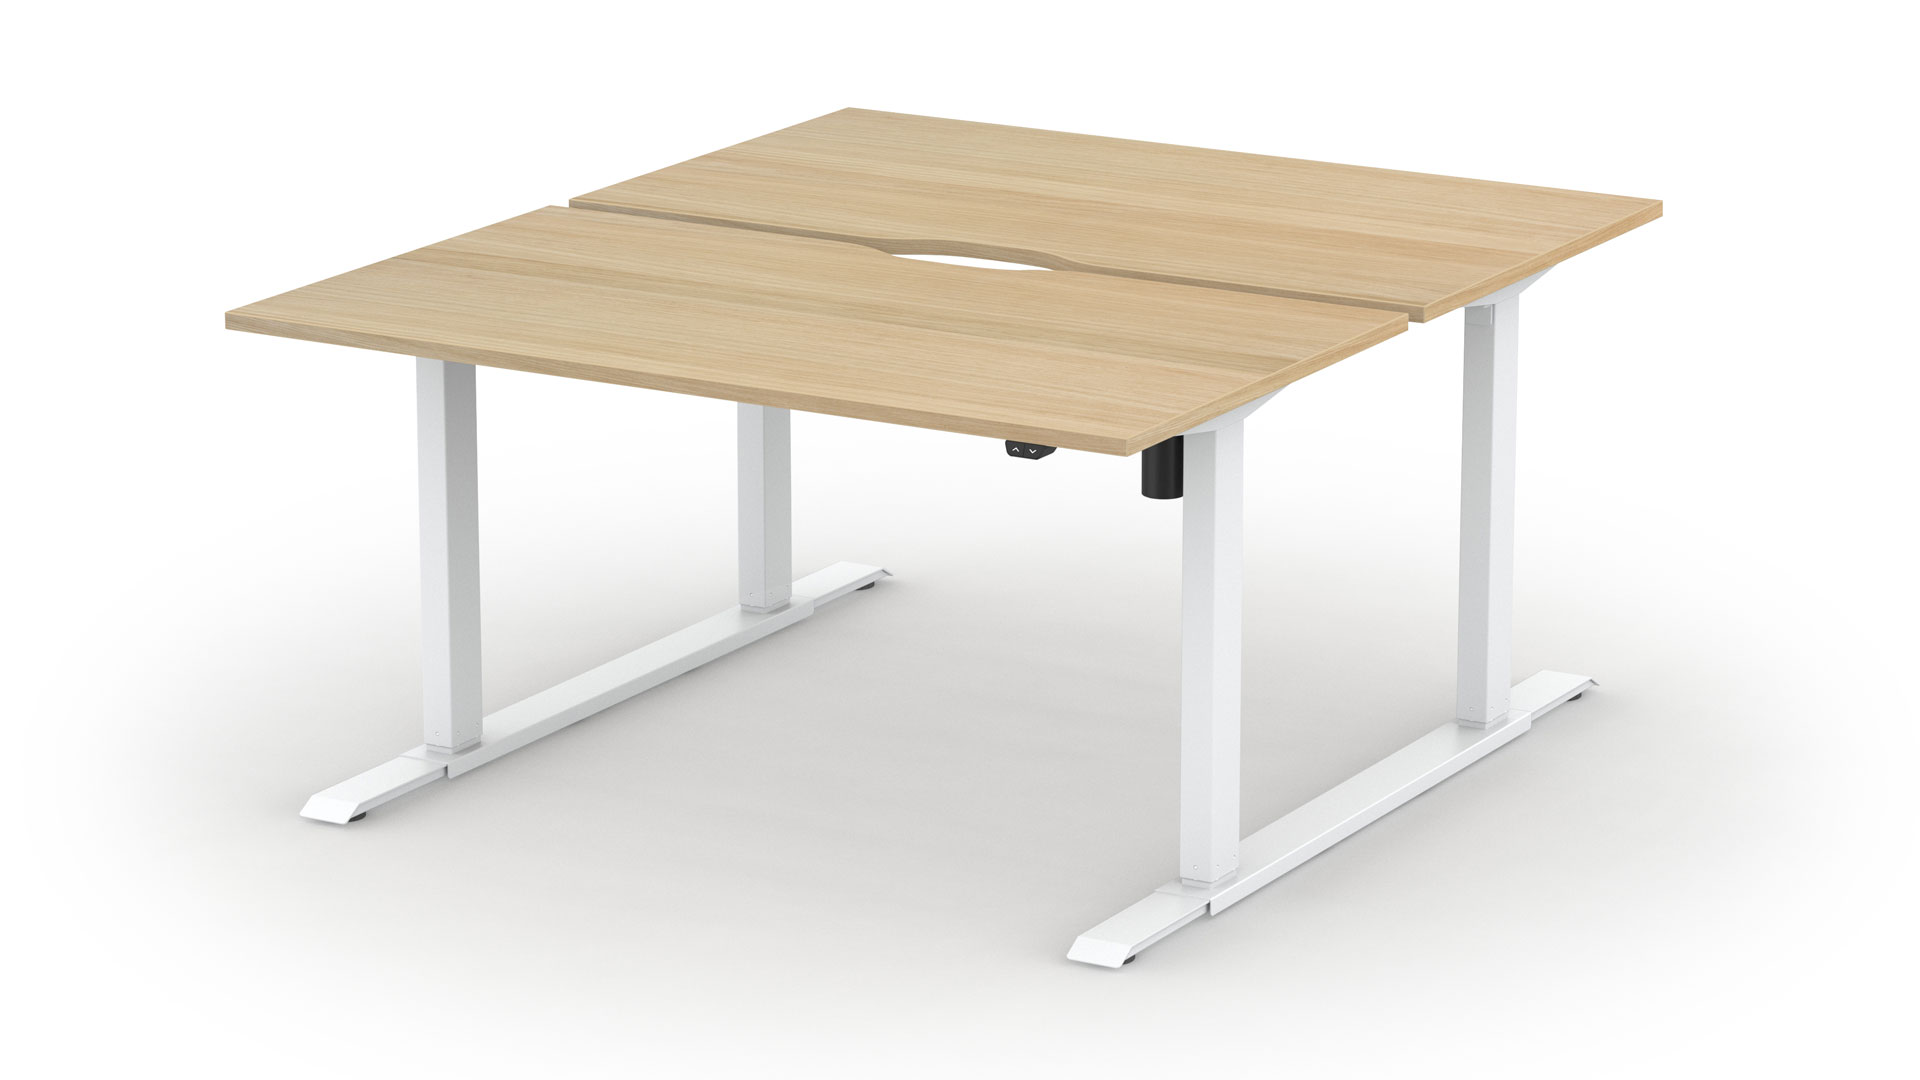 The Alto 1 bench is made up of two desks joined back-to-back at the feet